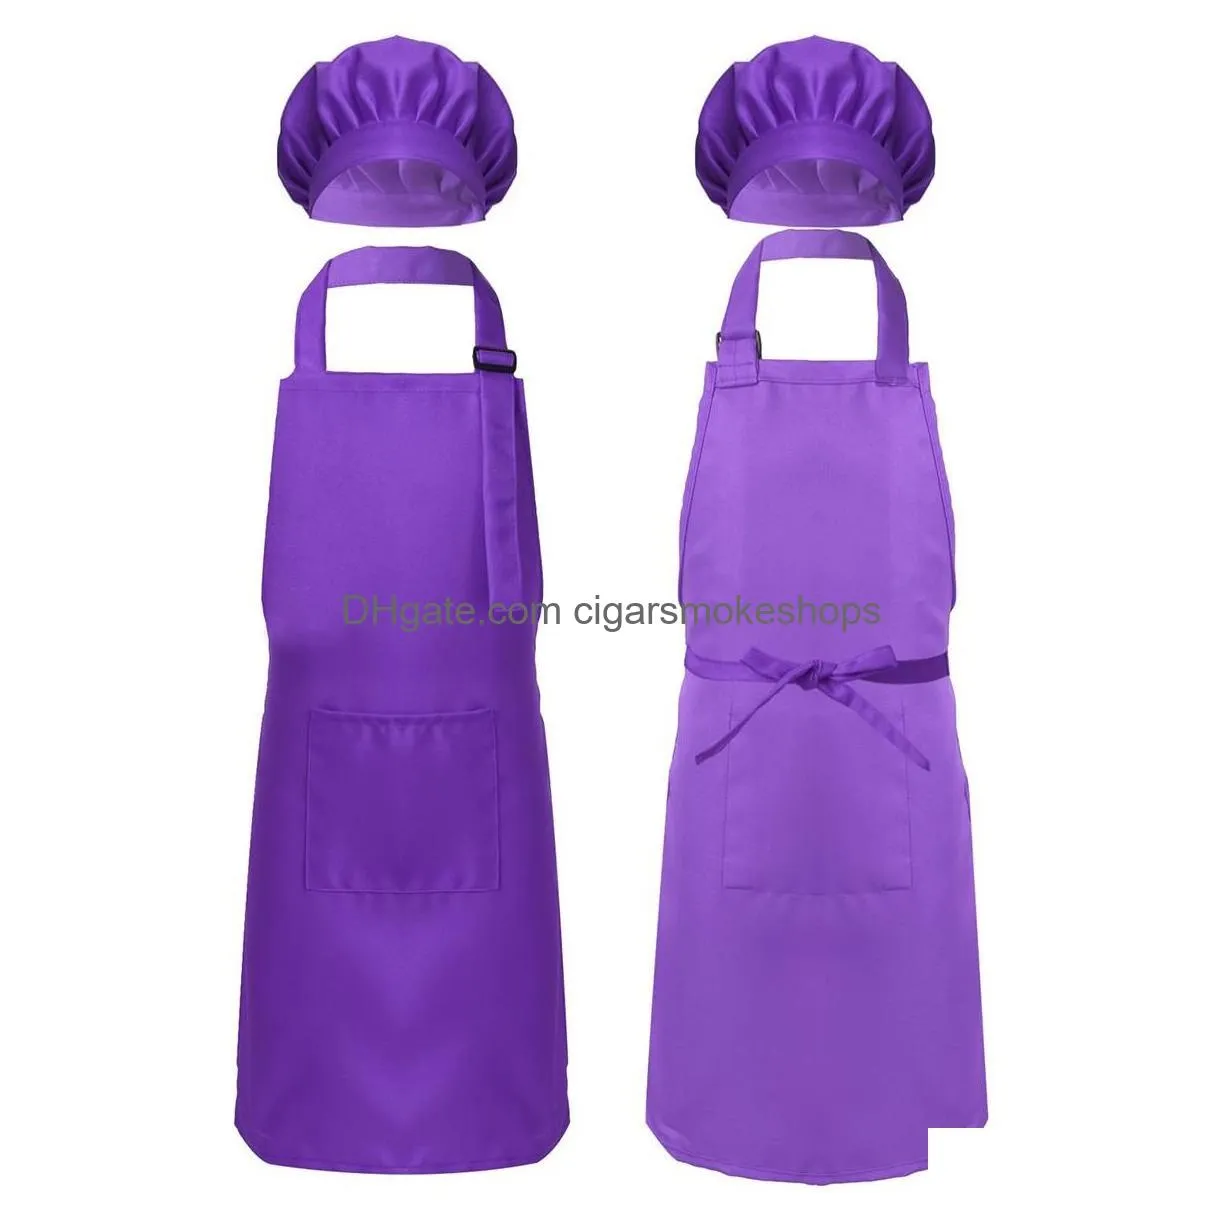 Aprons Us Stock Printable Customize Logo Children Chef Apron Set Kitchen Waists 12 Colors Kids With Hats For Painting Cooking Drop Del Dhe1U